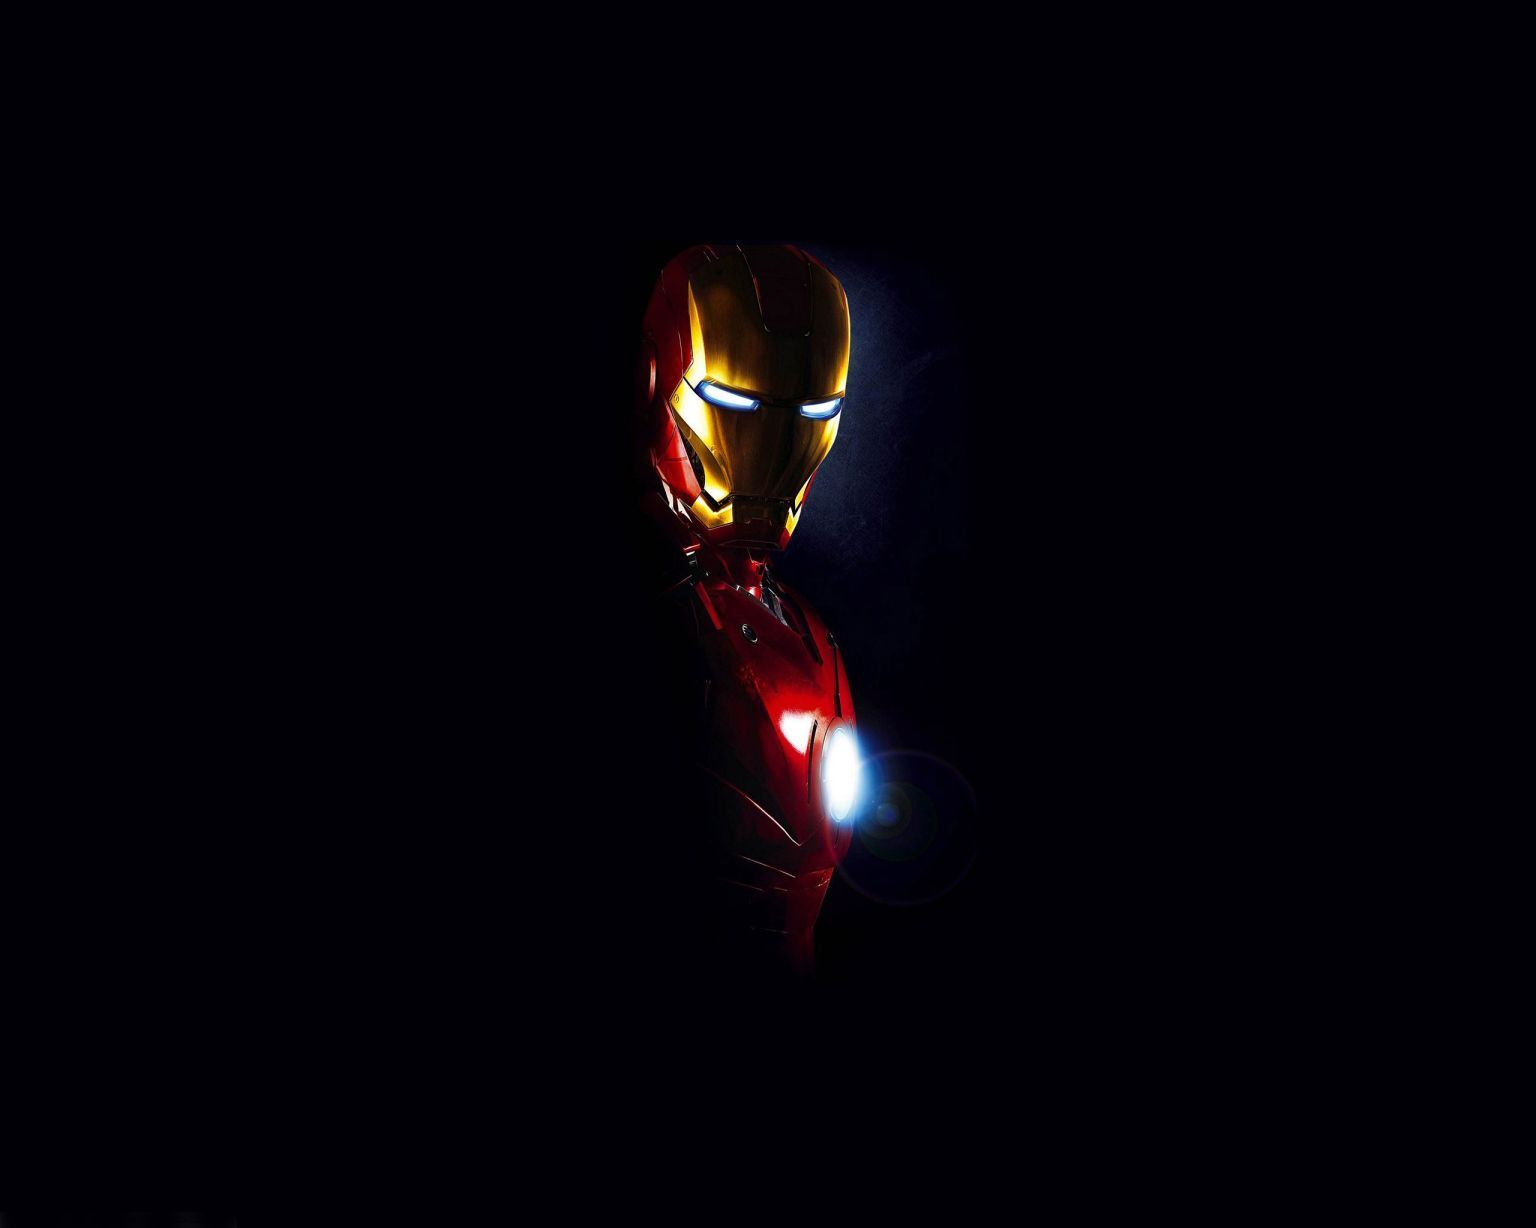 Iron Man Mask Hd Image For Android (1). Iron Man